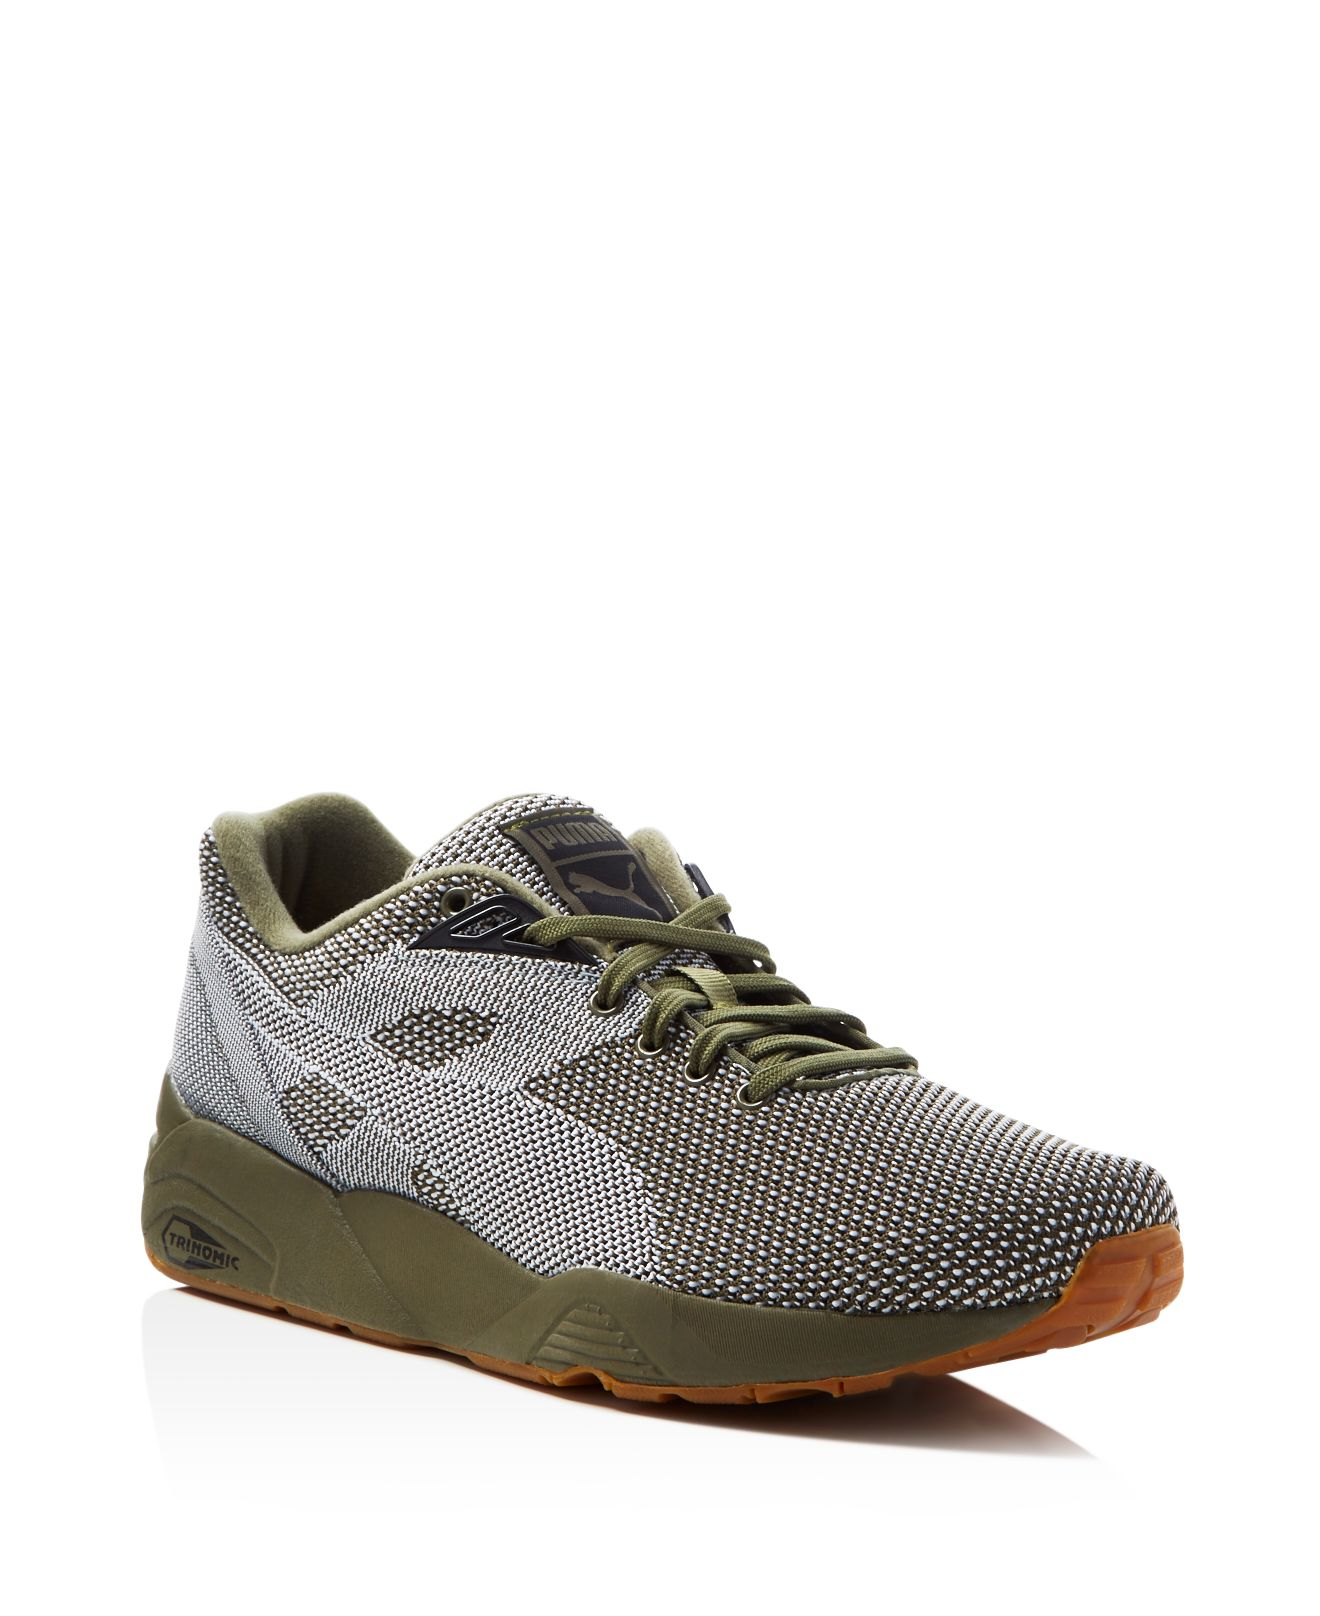 Puma R698 Knit Mesh V2 Lace Up Sneakers - Compare At $90 in Green for ...